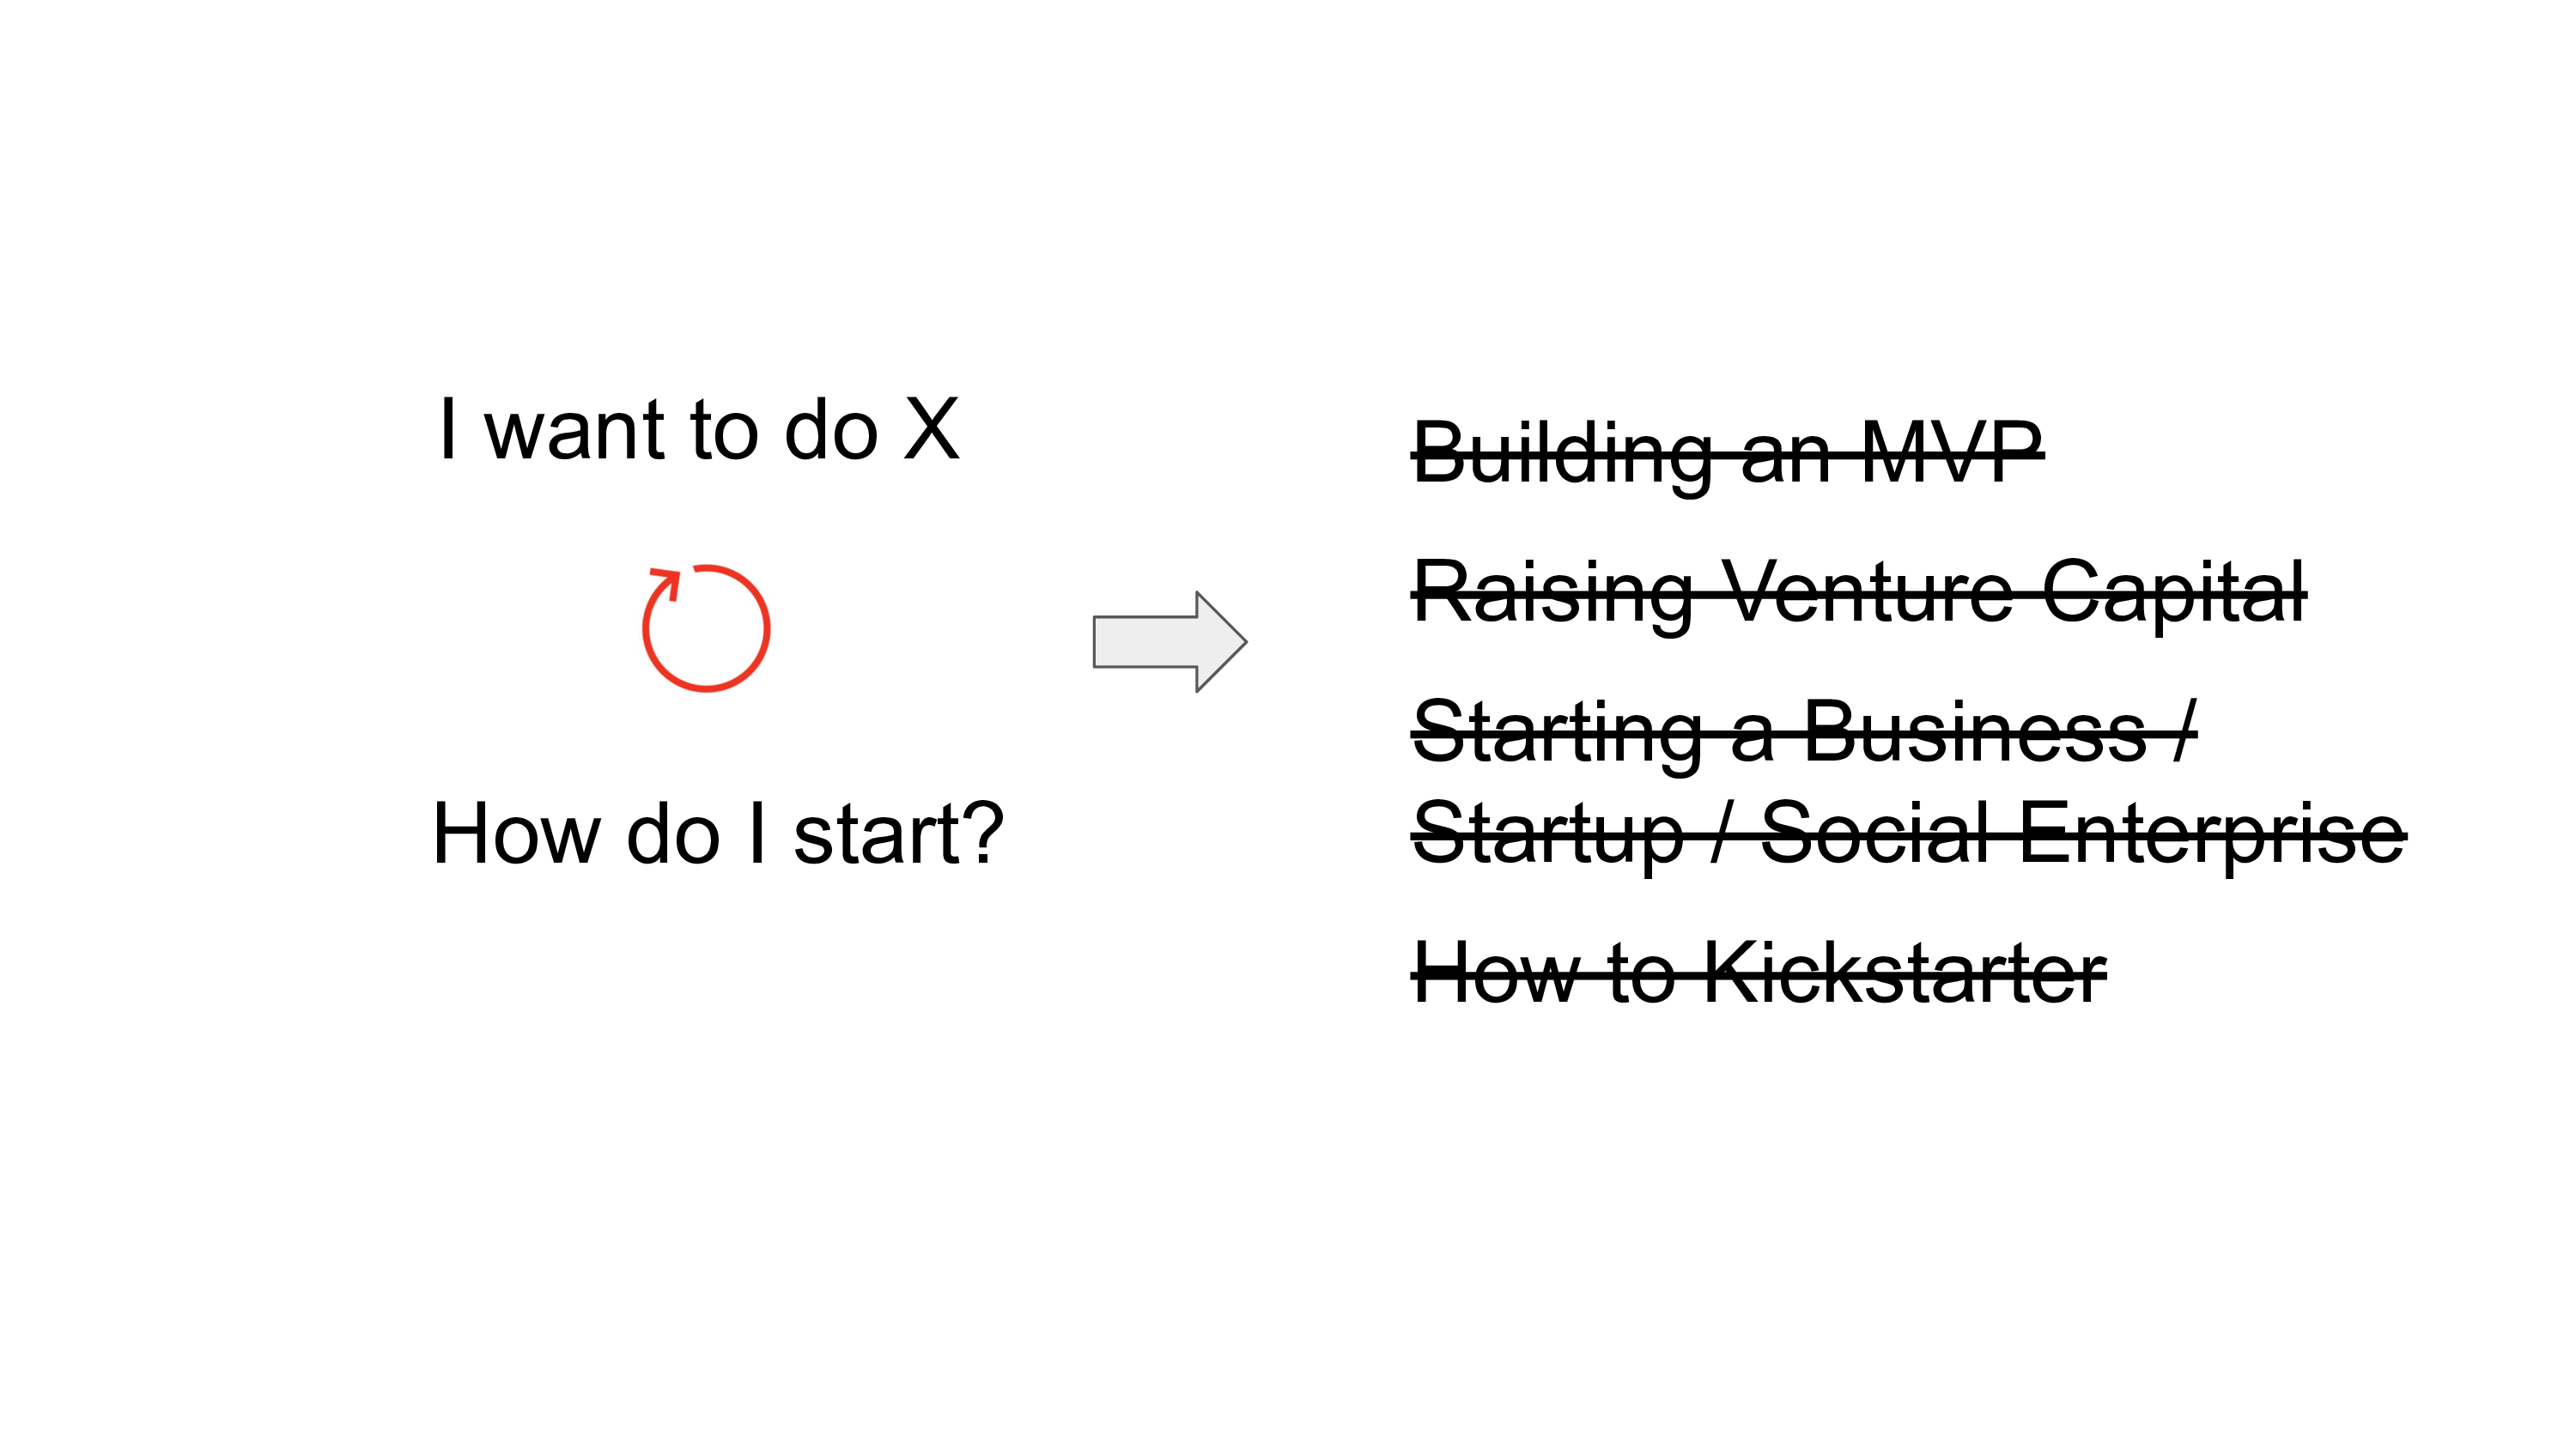 Our course does not focus on typical 'entrepeneurship skill' like building a MVP, raising venture capital, or even how to run Kickstarter campaigns. Rather, it centers around how to take iterative steps towards a goal.